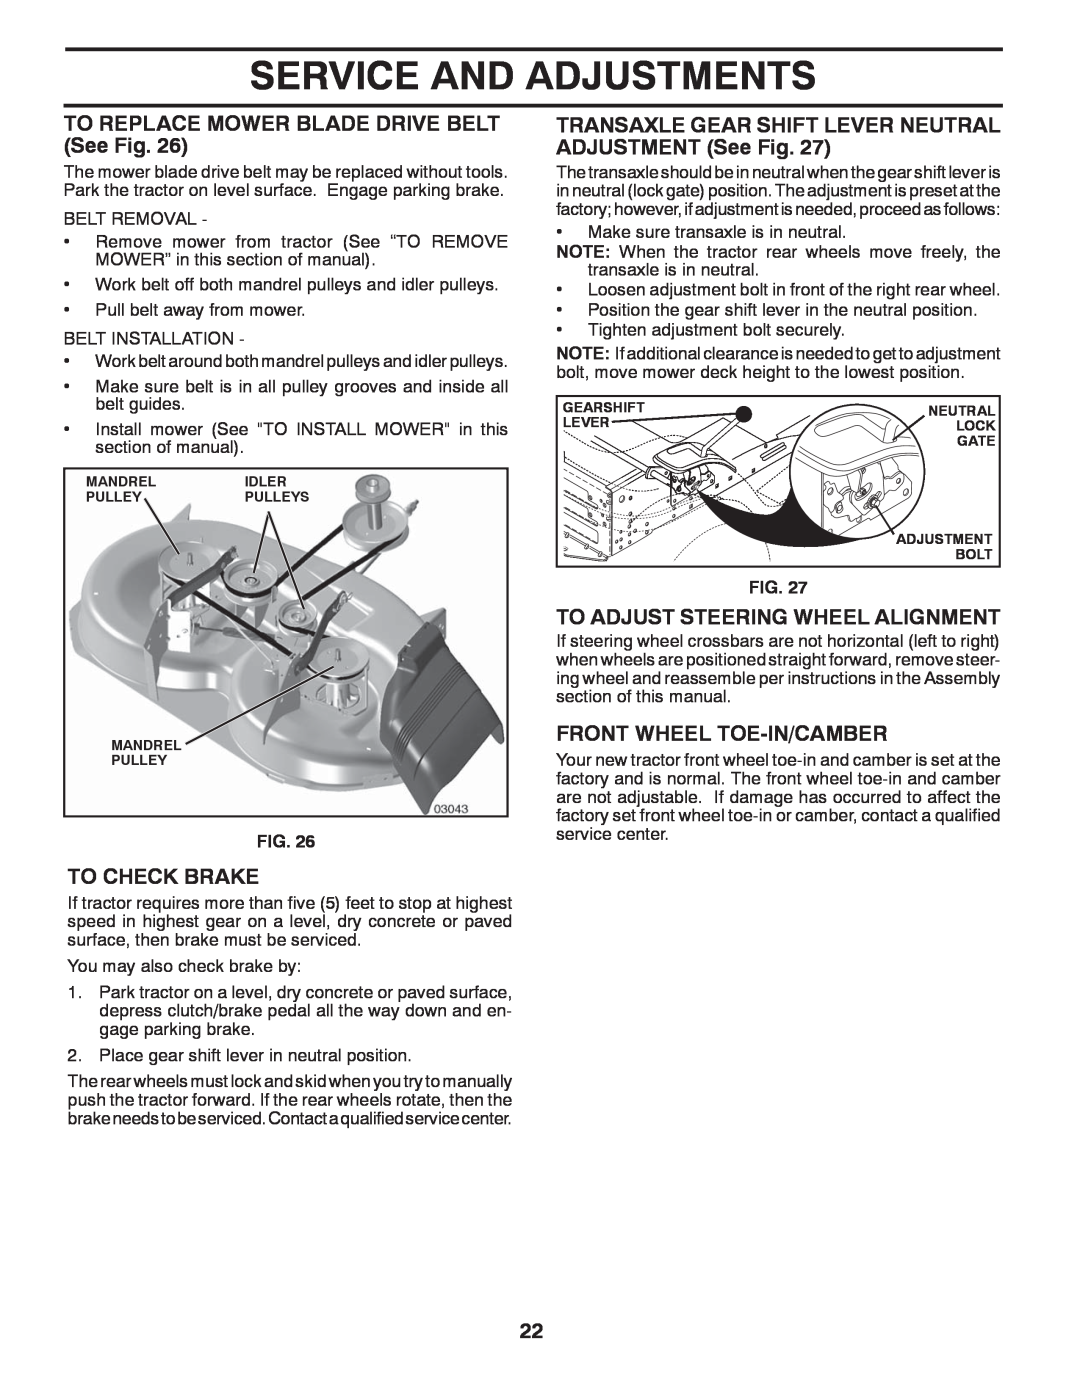 McCulloch 422800 manual TO REPLACE MOWER BLADE DRIVE BELT See Fig, To Check Brake, To Adjust Steering Wheel Alignment 